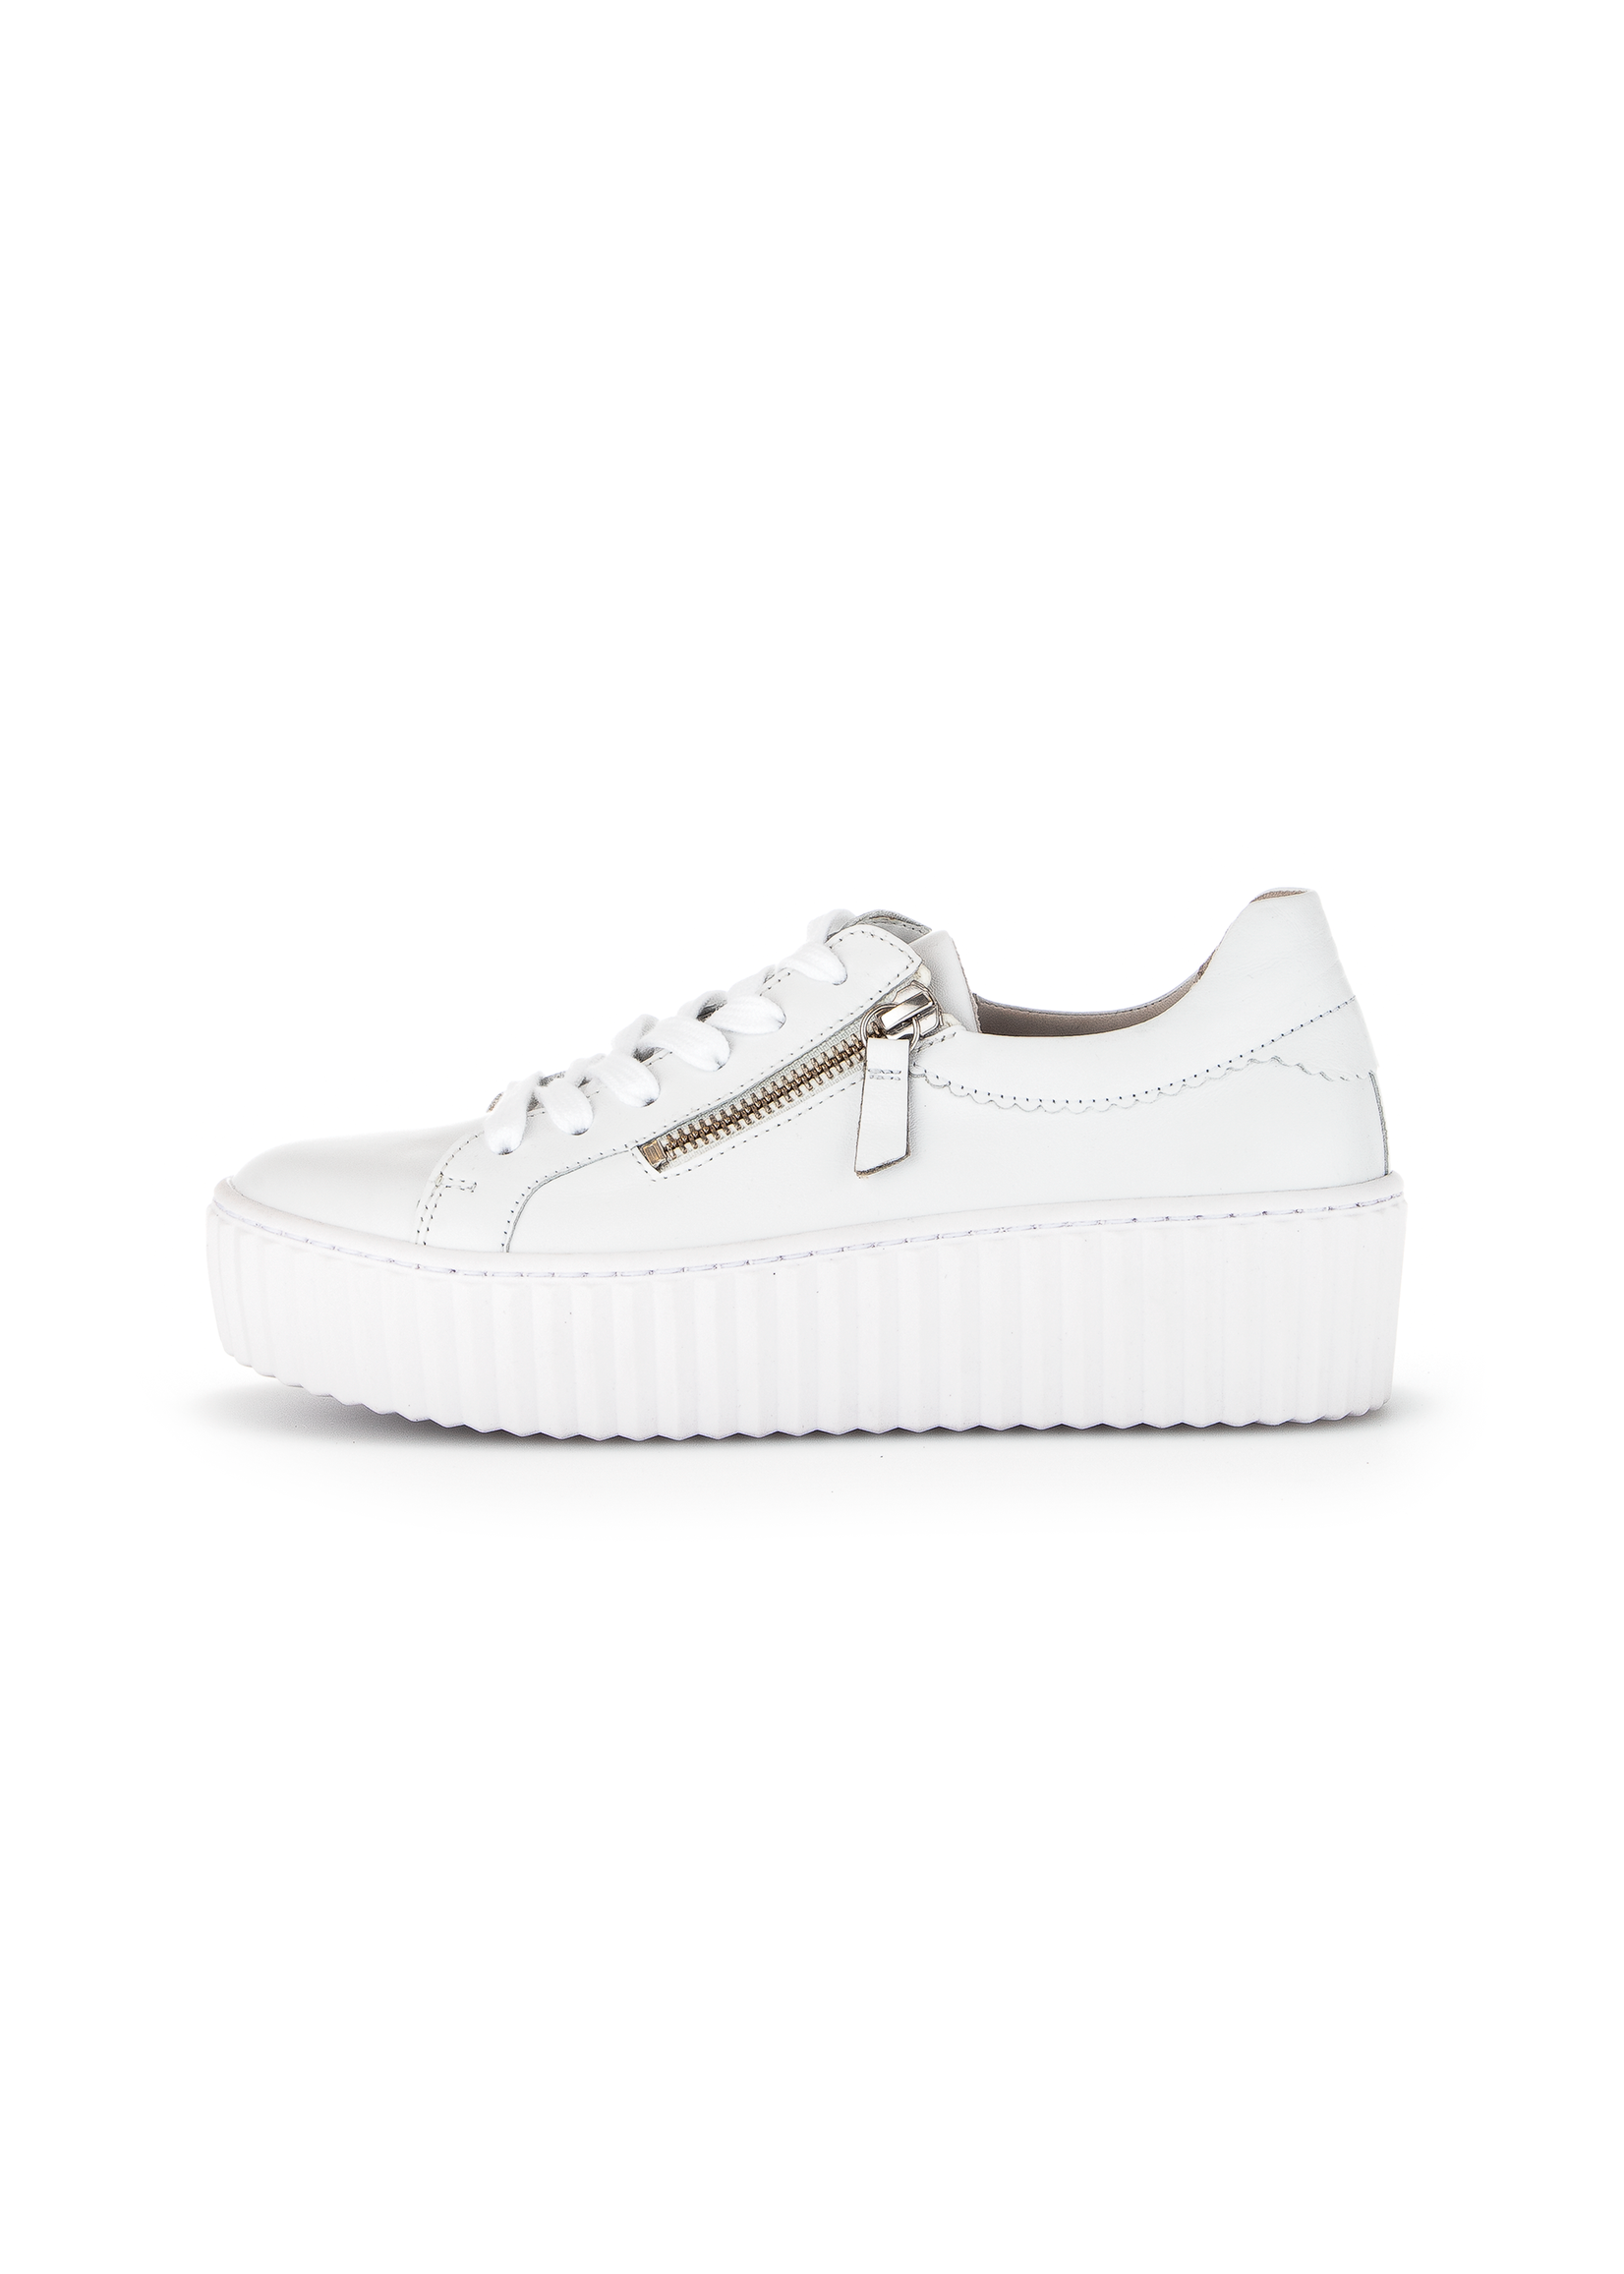 Gabor Double Zip Platform Sneakers in White Leather by Gabor 23.200.21